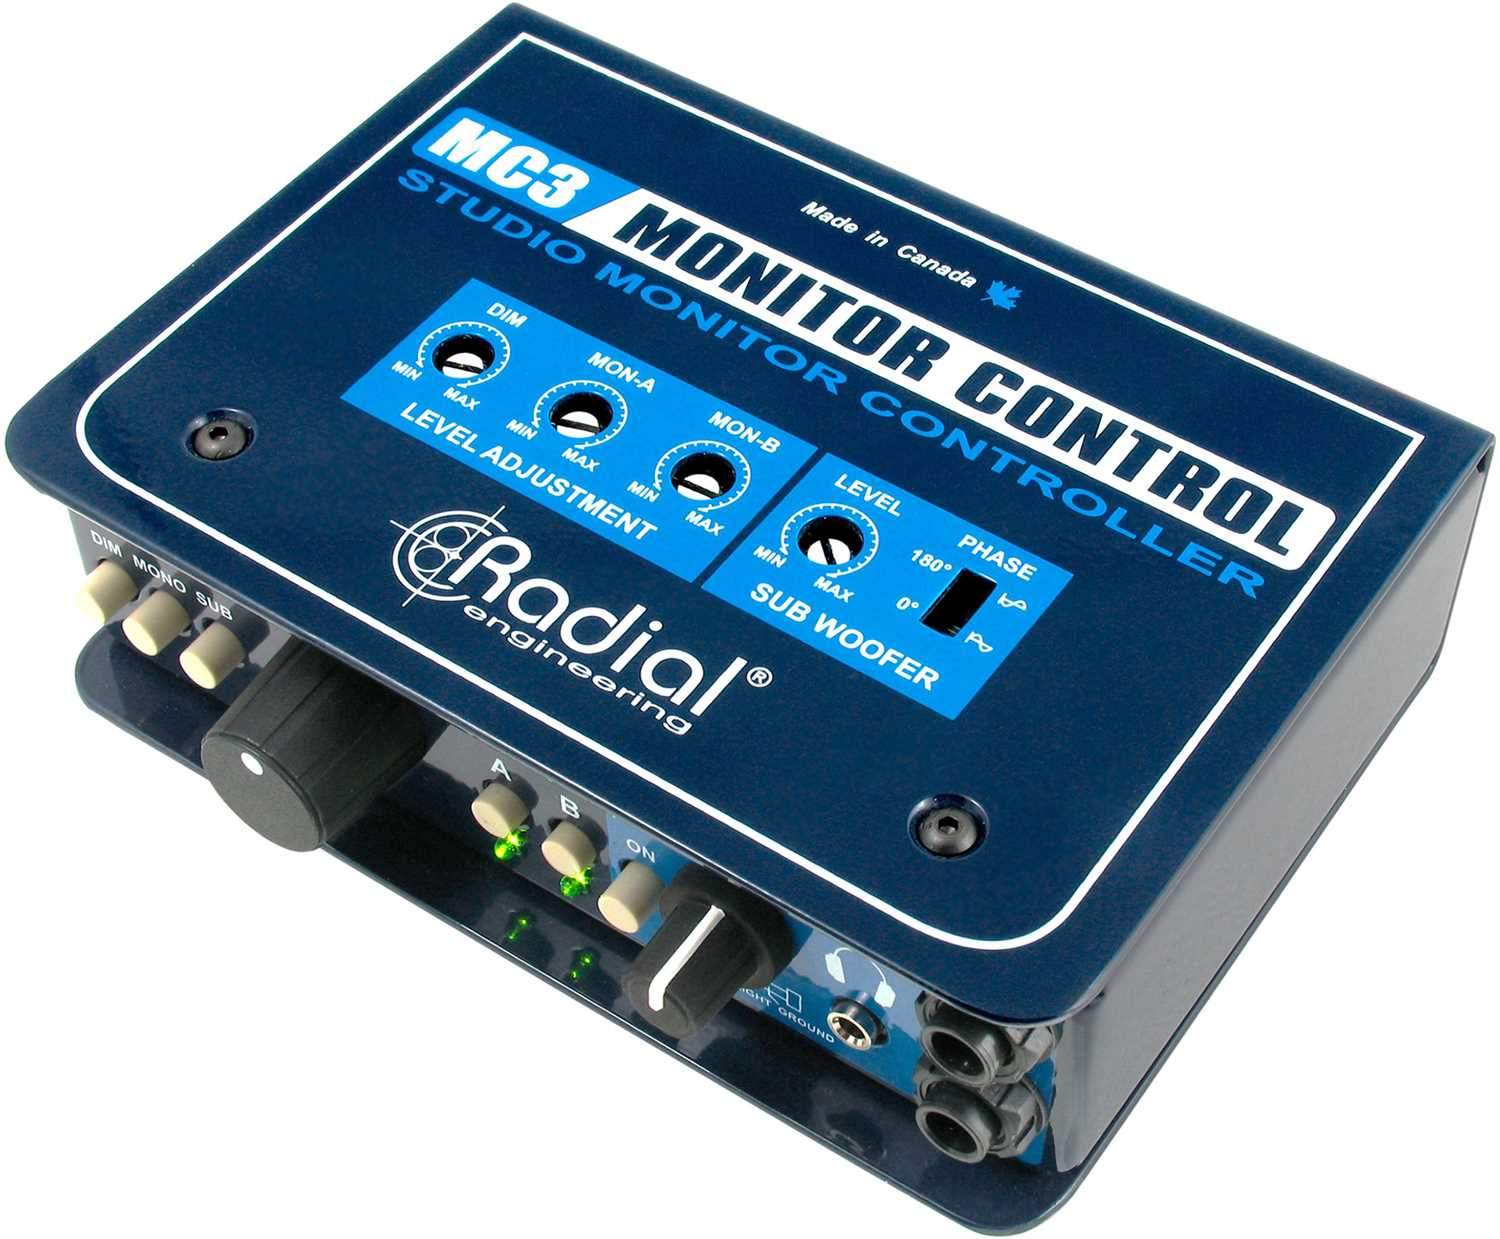 Radial MC3 Passive Studio Monitor Controller - PSSL ProSound and Stage Lighting